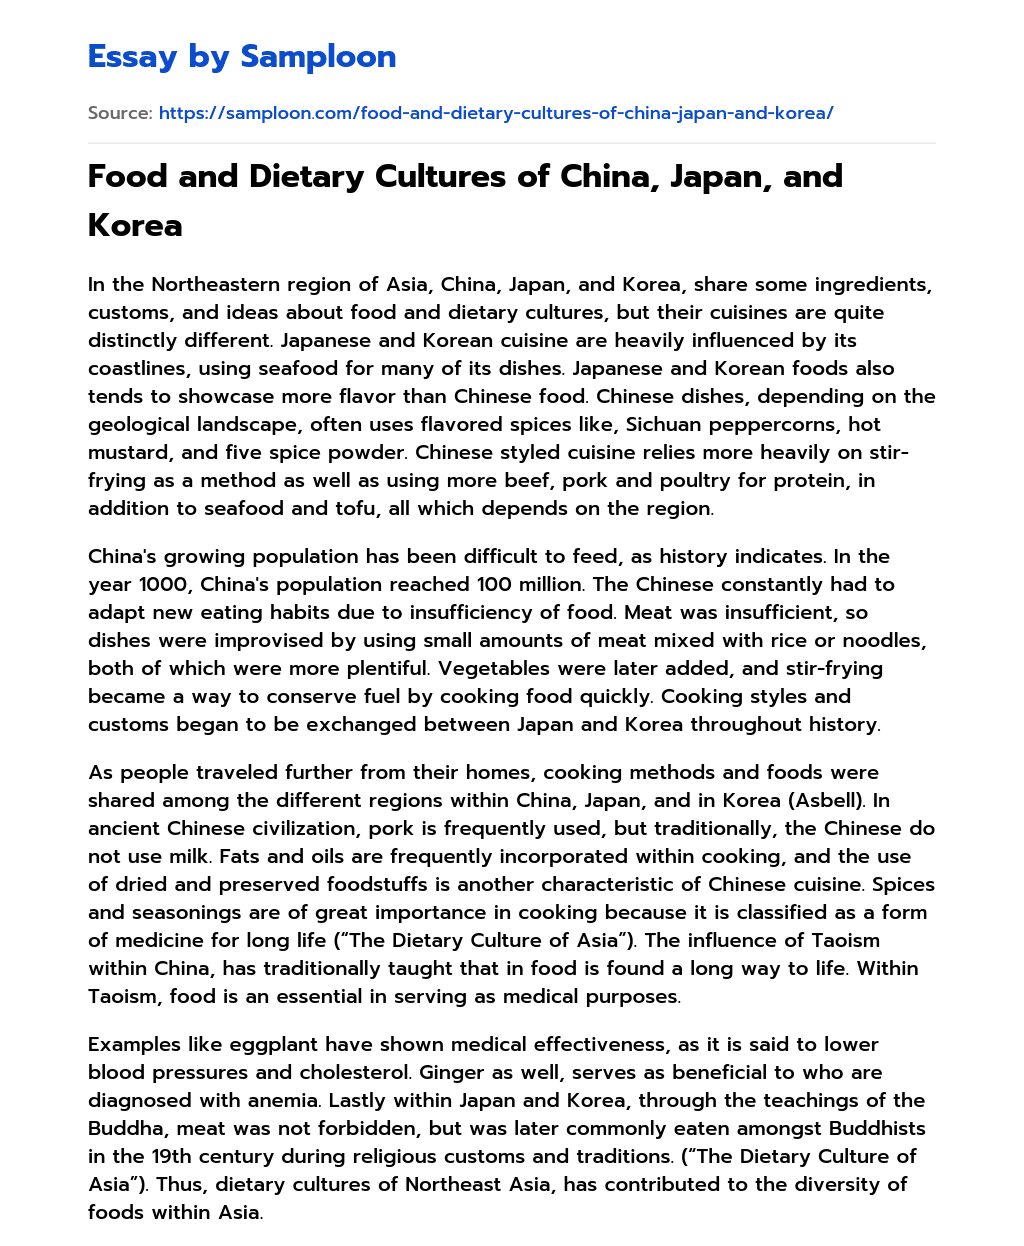 Food and Dietary Cultures of China, Japan, and Korea essay